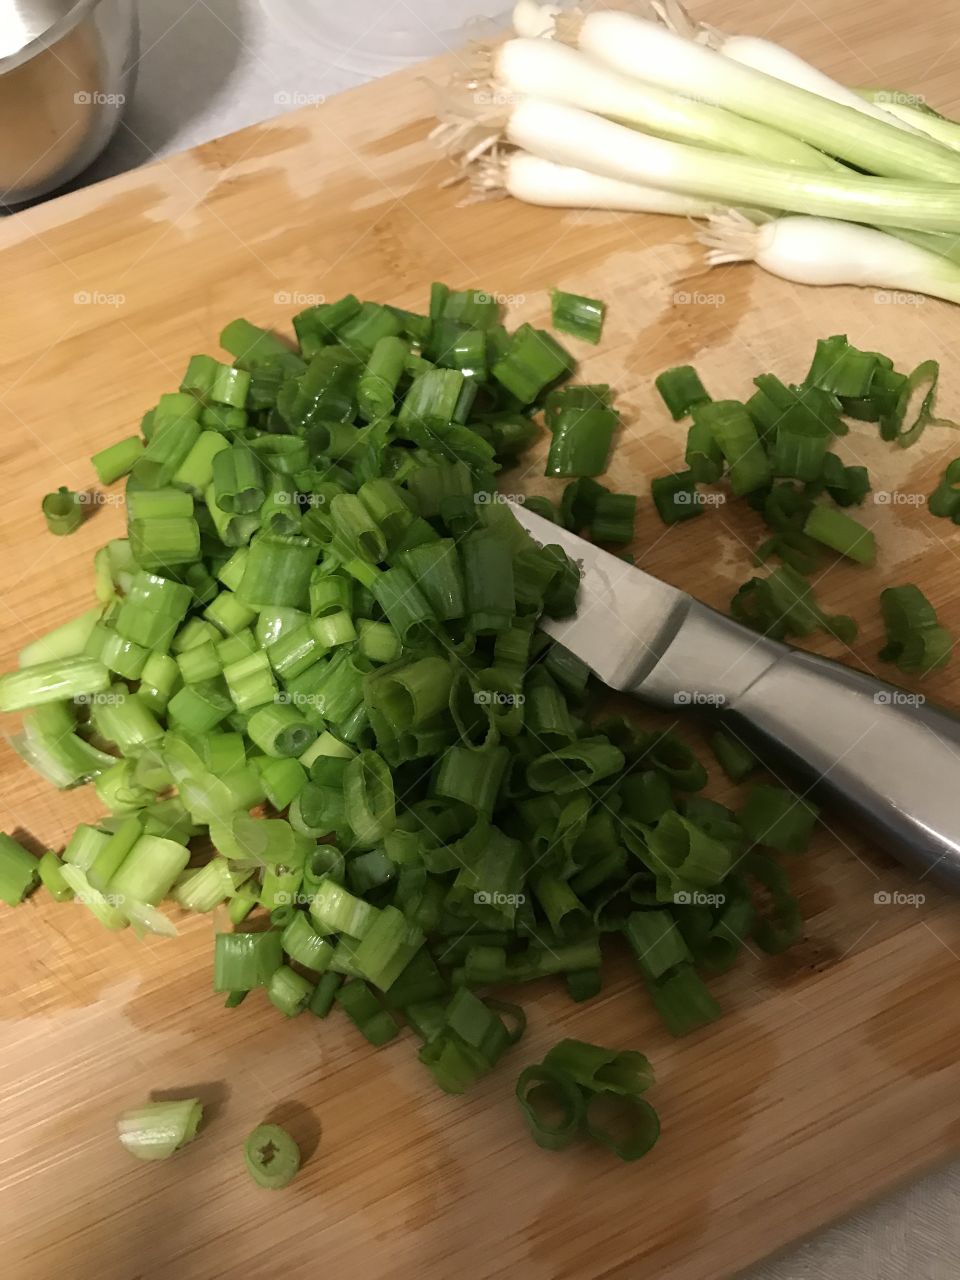 Green onions diced